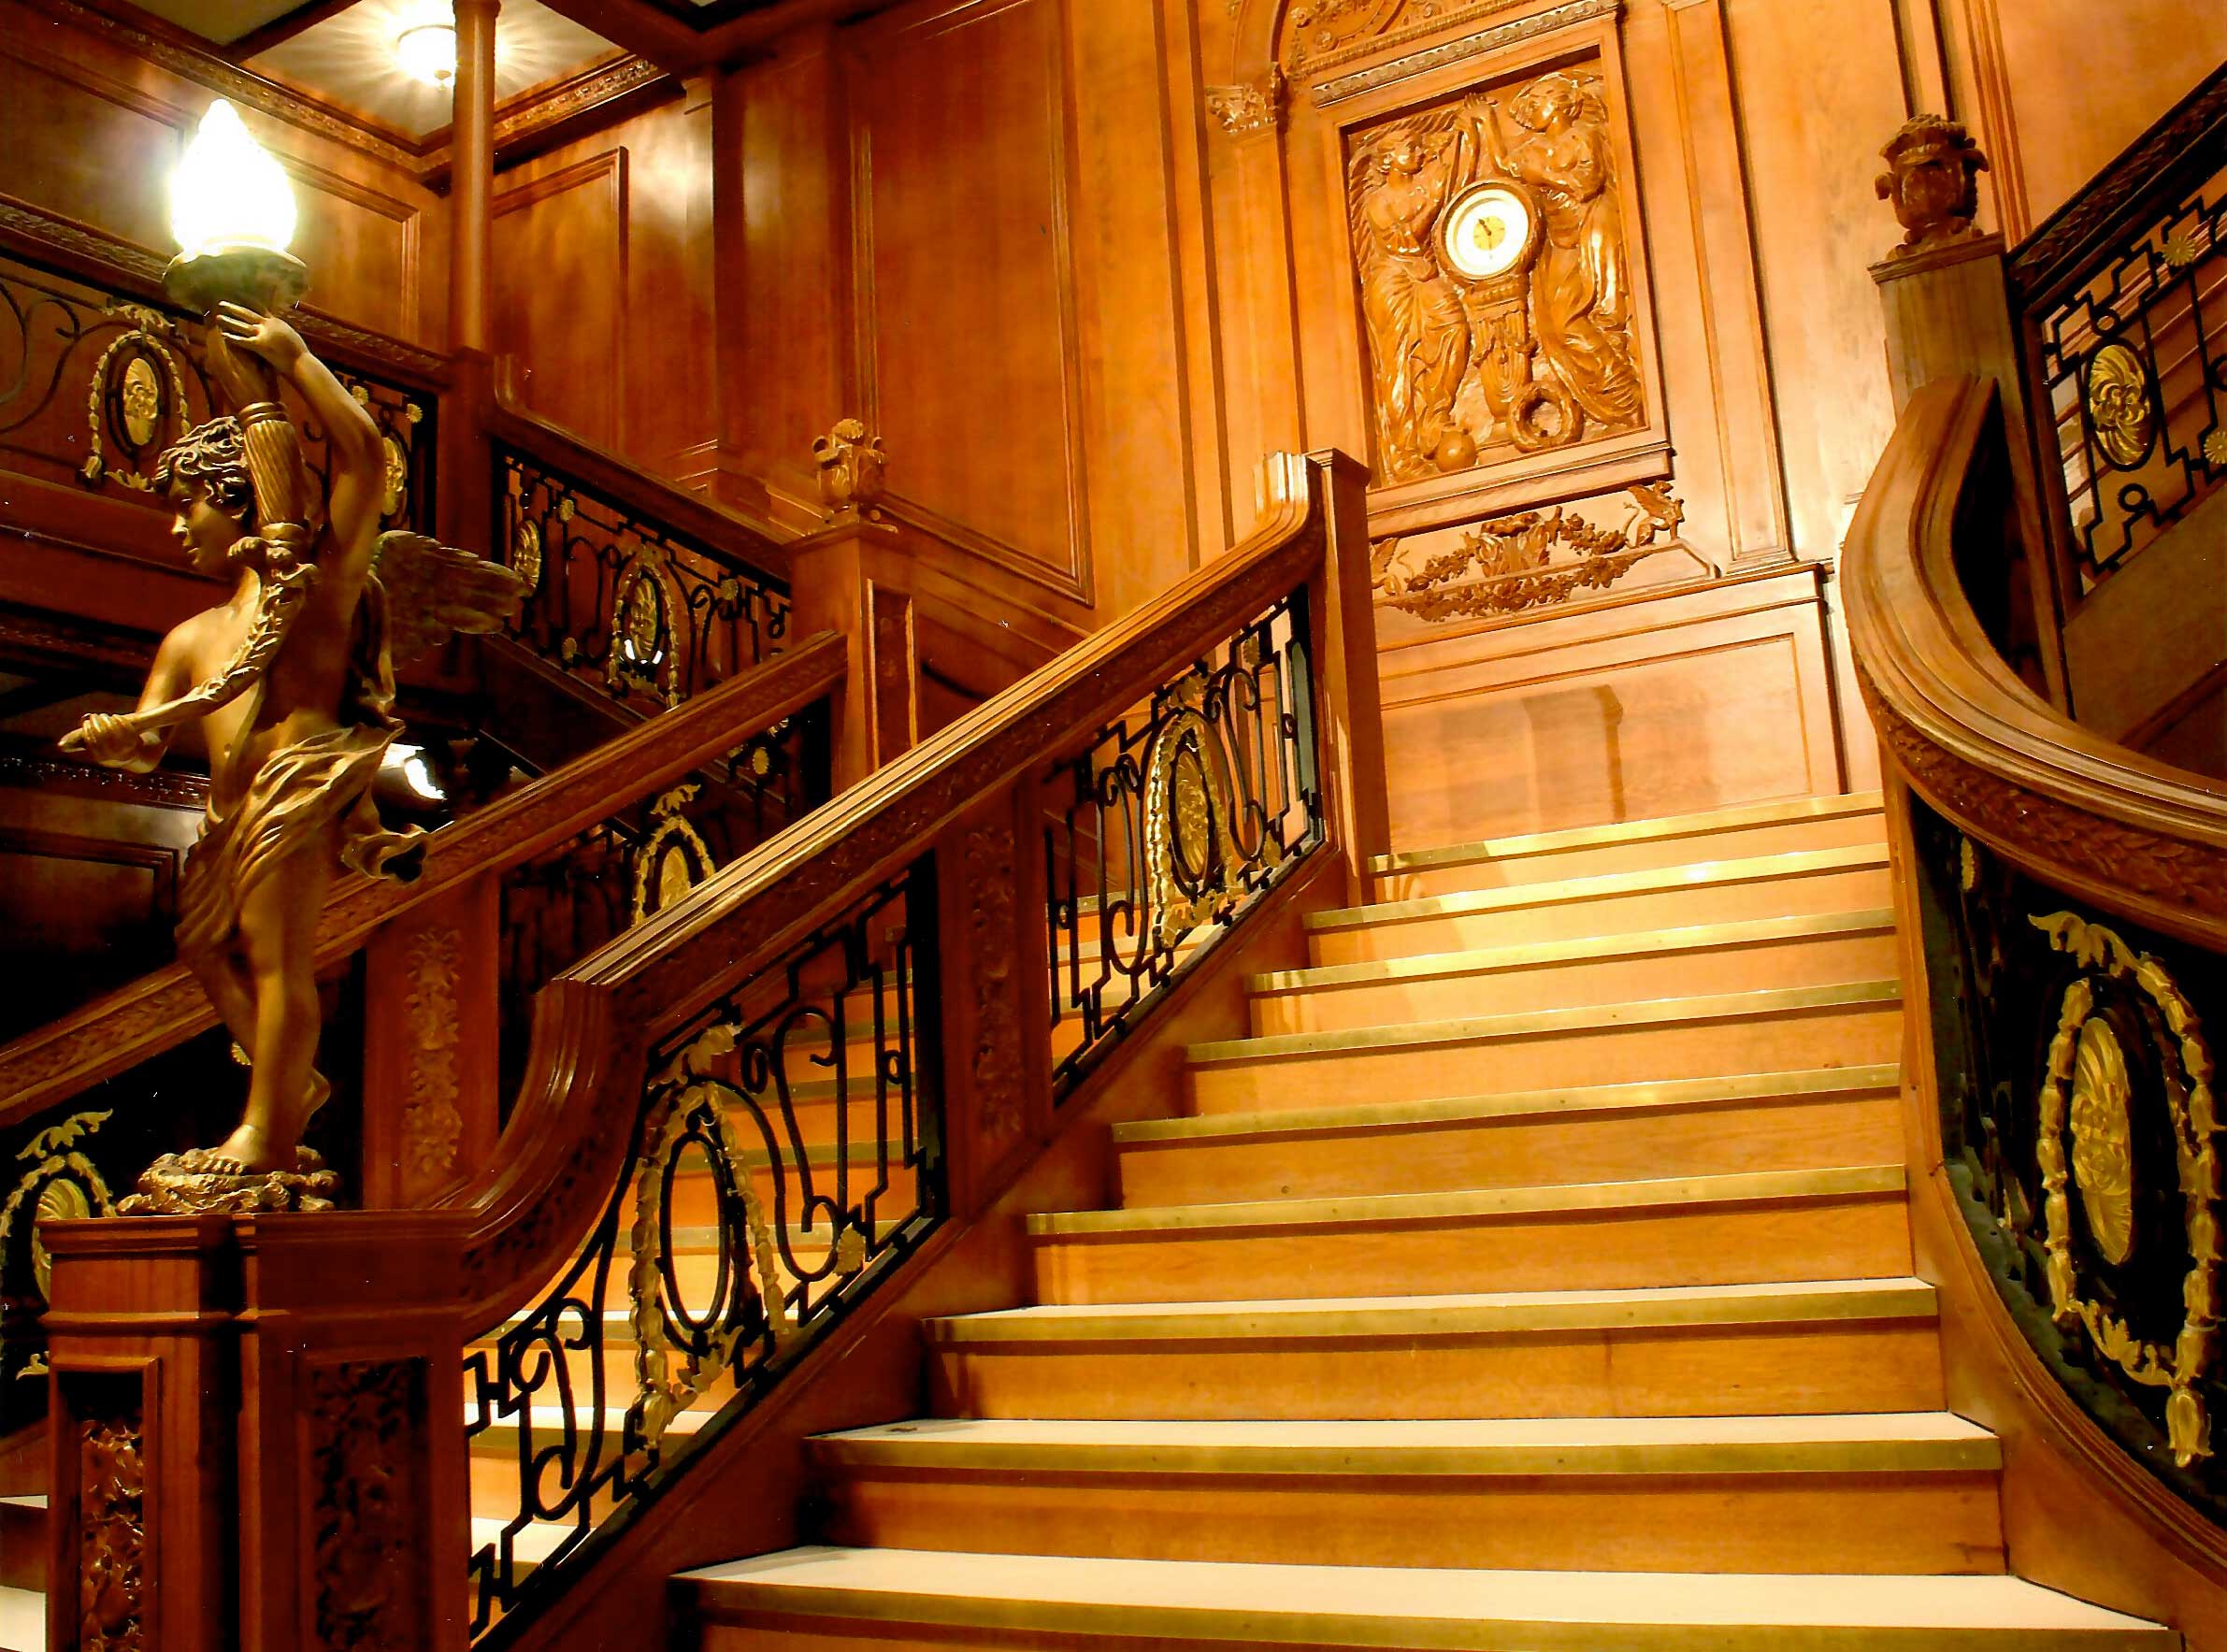 The Titanic Artifact Exhibition's stairway where it offers a solemn presentation of recovered artifacts from the ship, aiming to evoke the historical context of its tragic voyage.